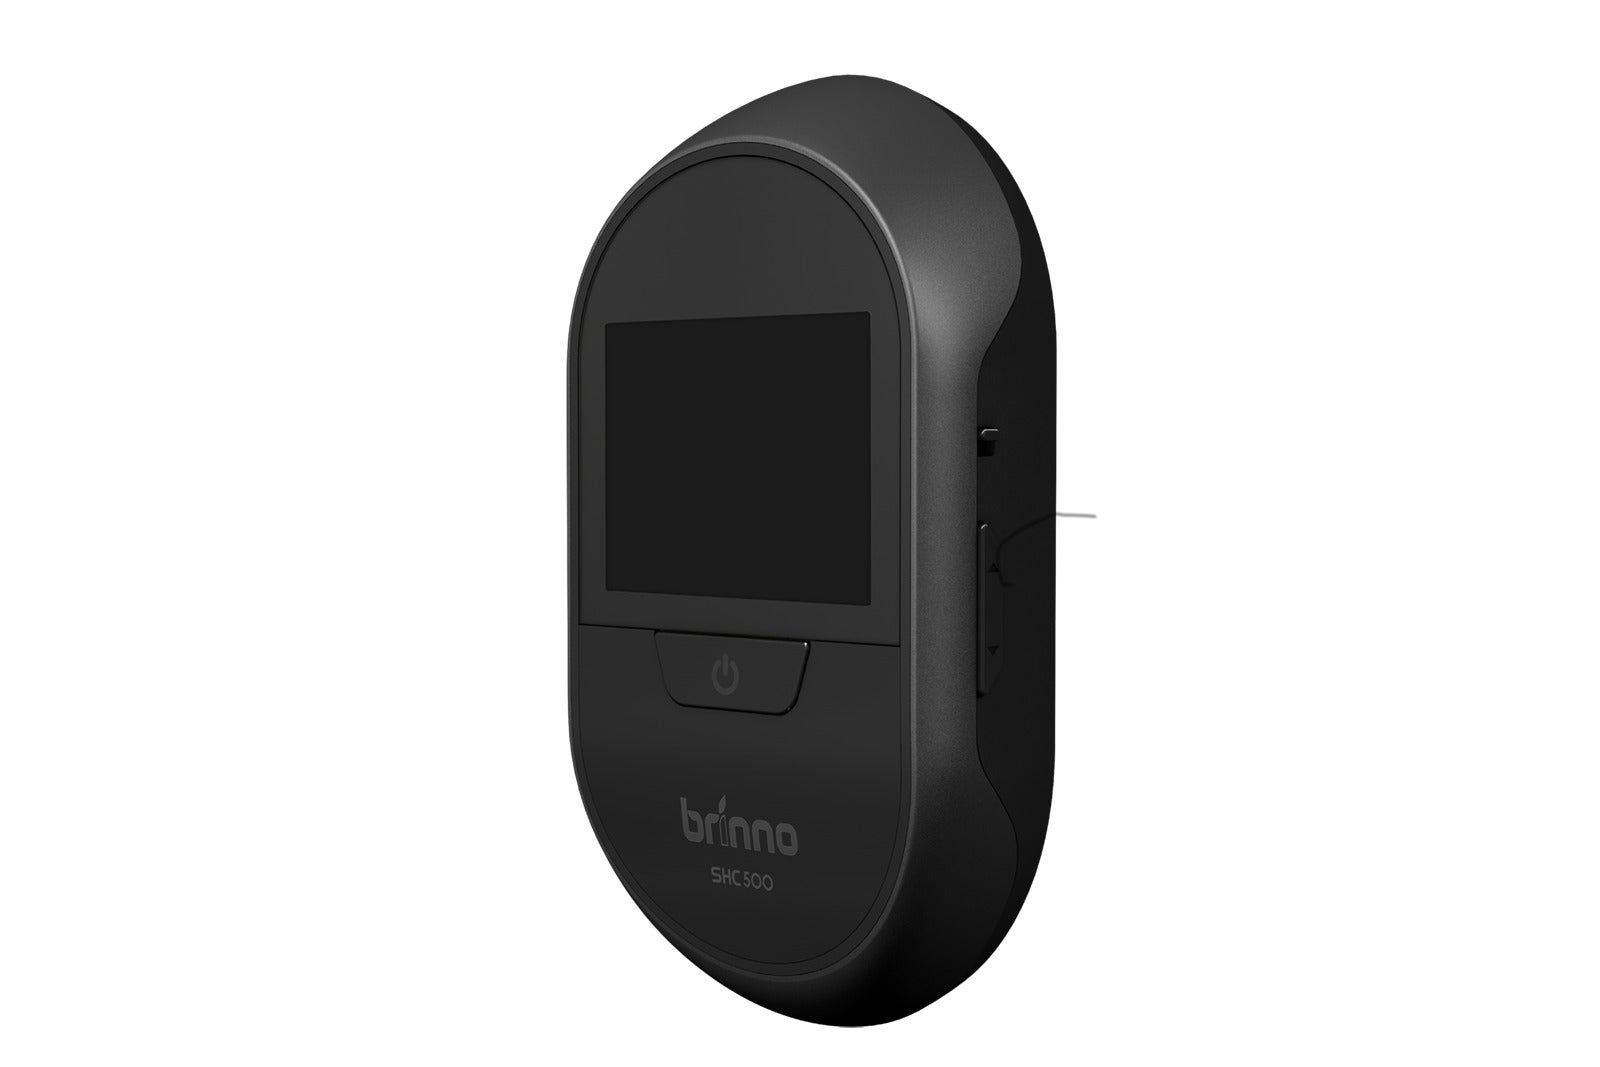 Brinno SHC500 Peephole Camera review: Peep your porch with this hidden
camera TechHive